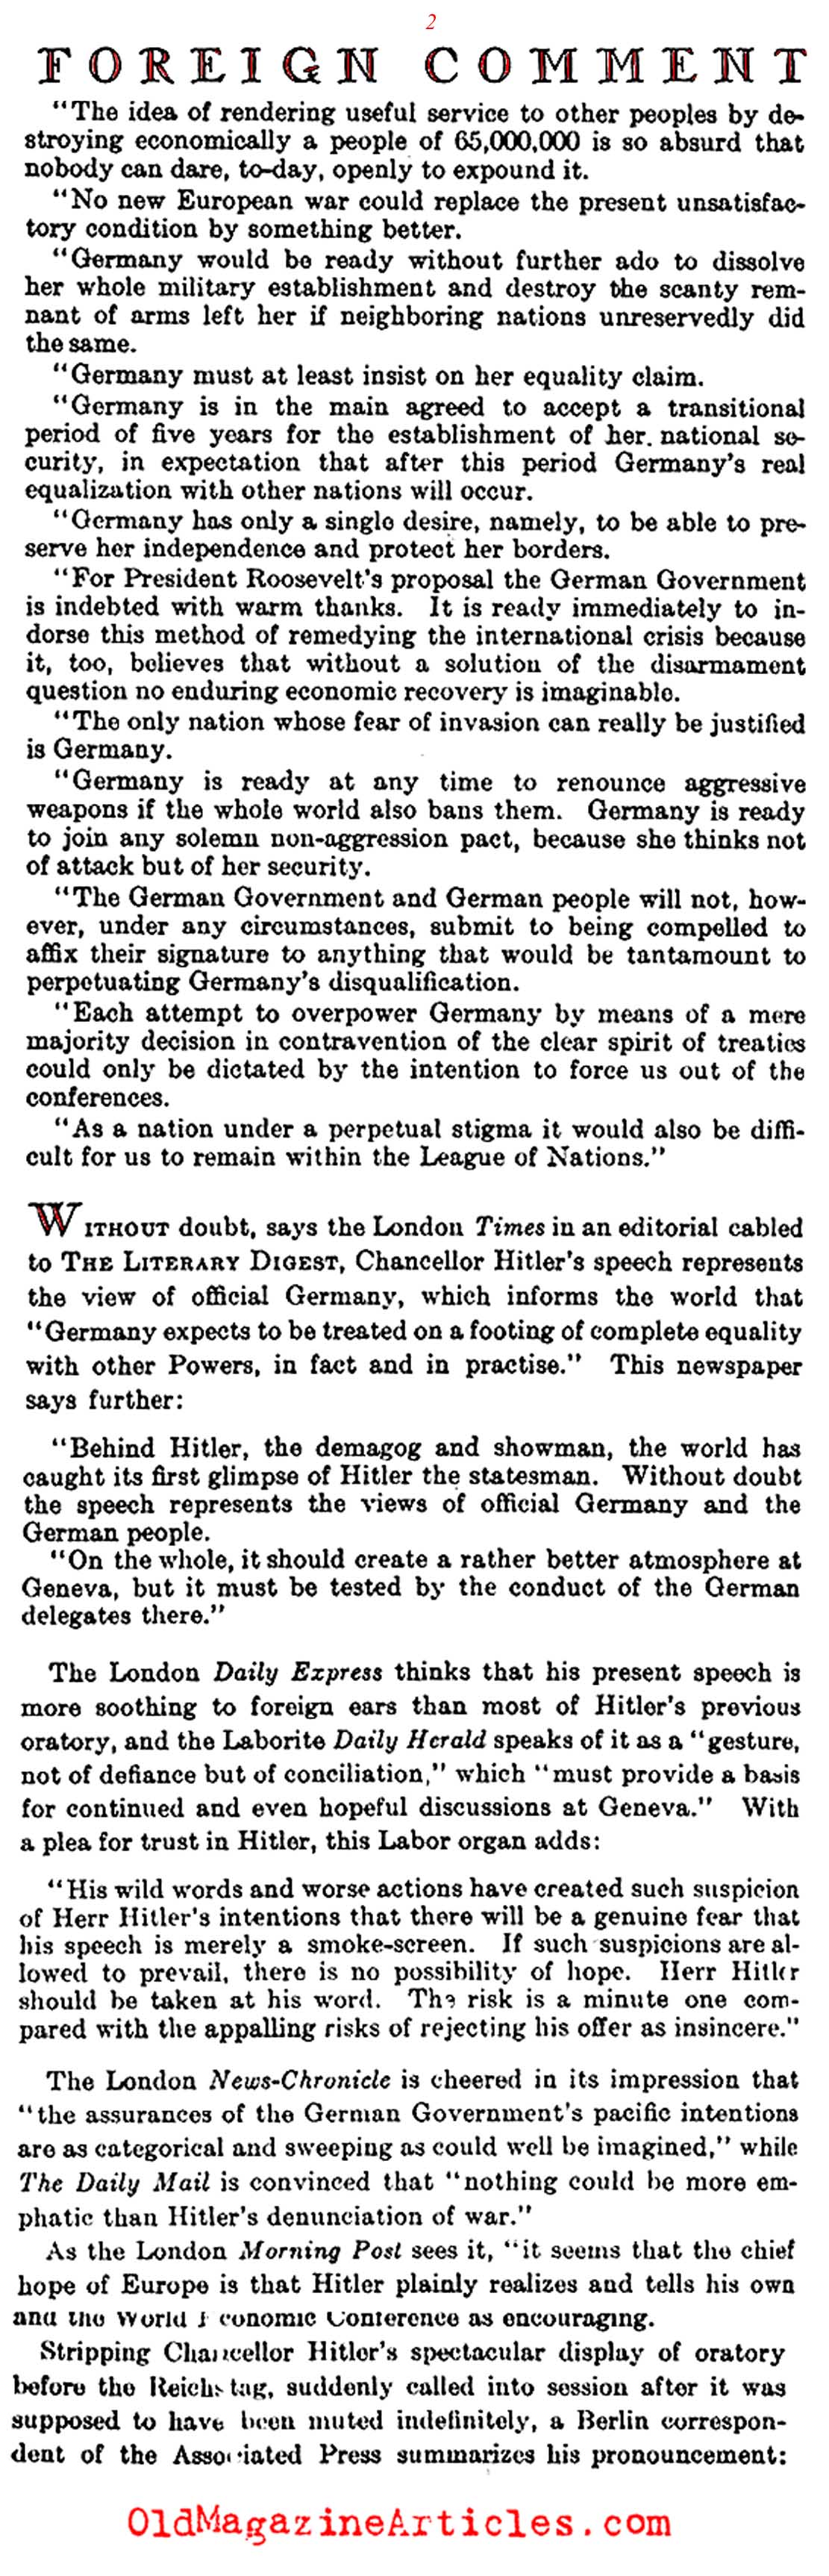 What is Next for Europe? (Literary Digest, 1933)